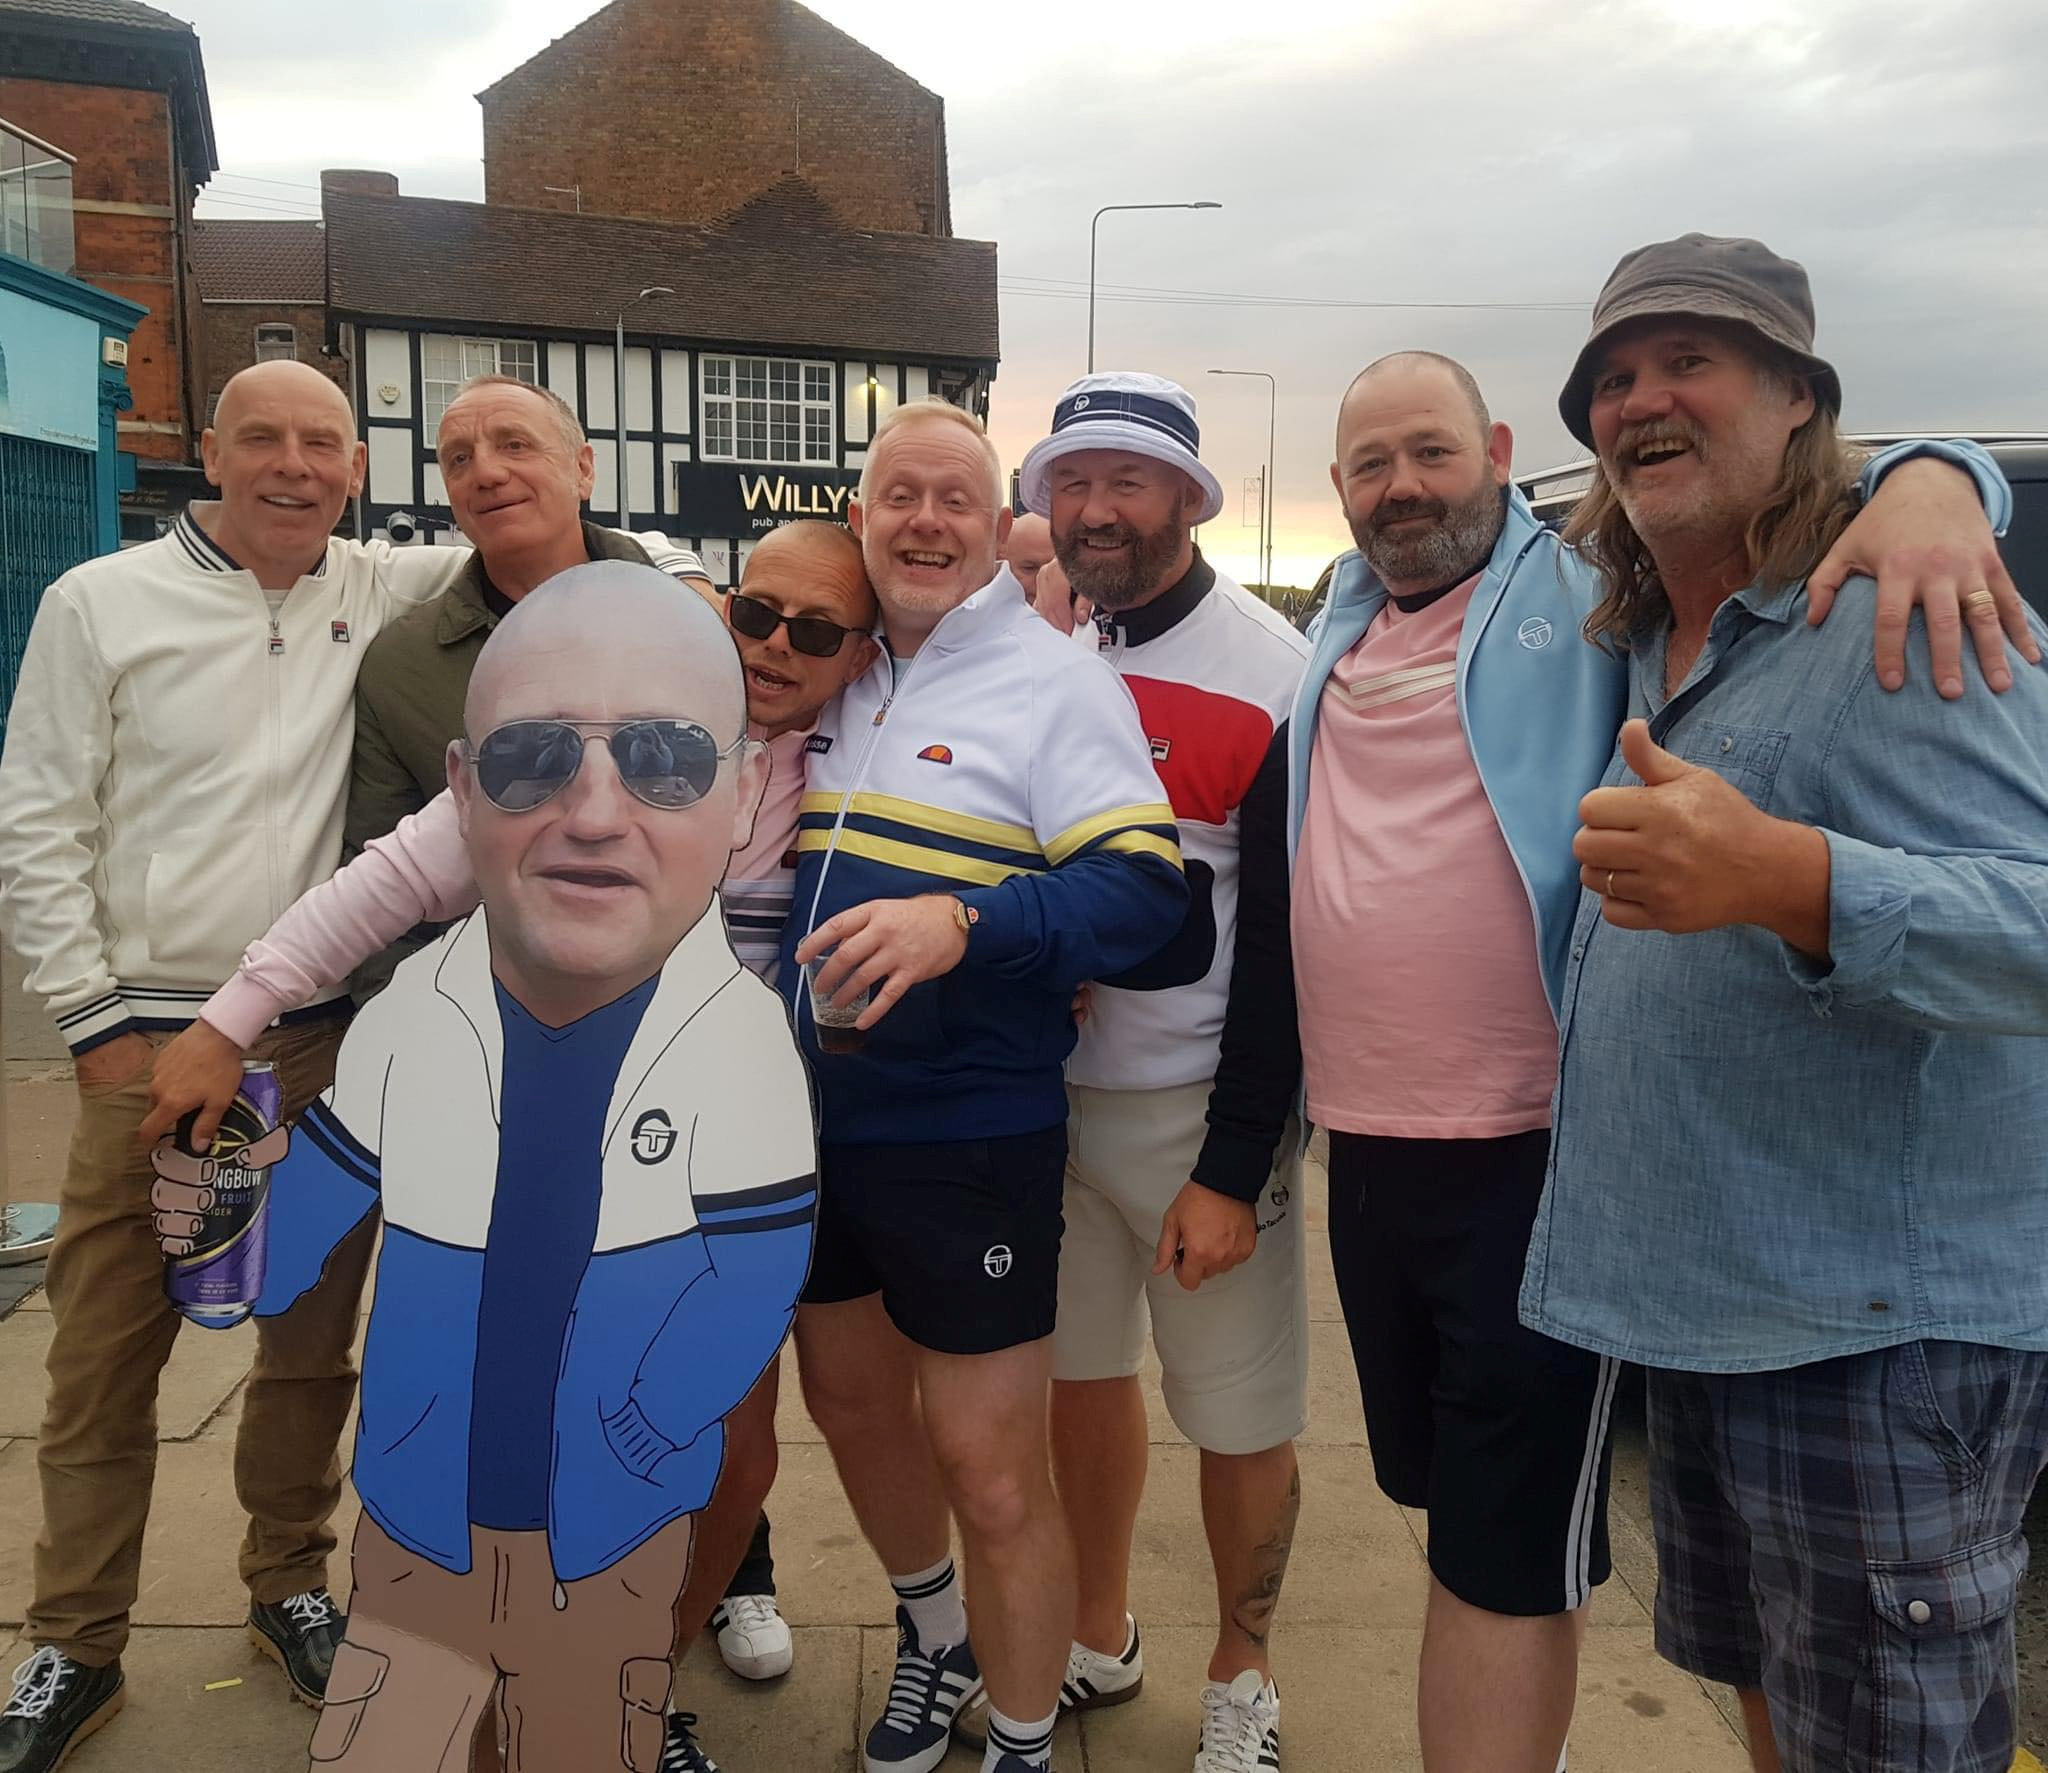 A group of 40 friends gathered from around the world to go on a night out with a cardboard cut-out of their beloved pal who sadly lost his battle with cancer. (Matthew Newby SWNS/Zenger)